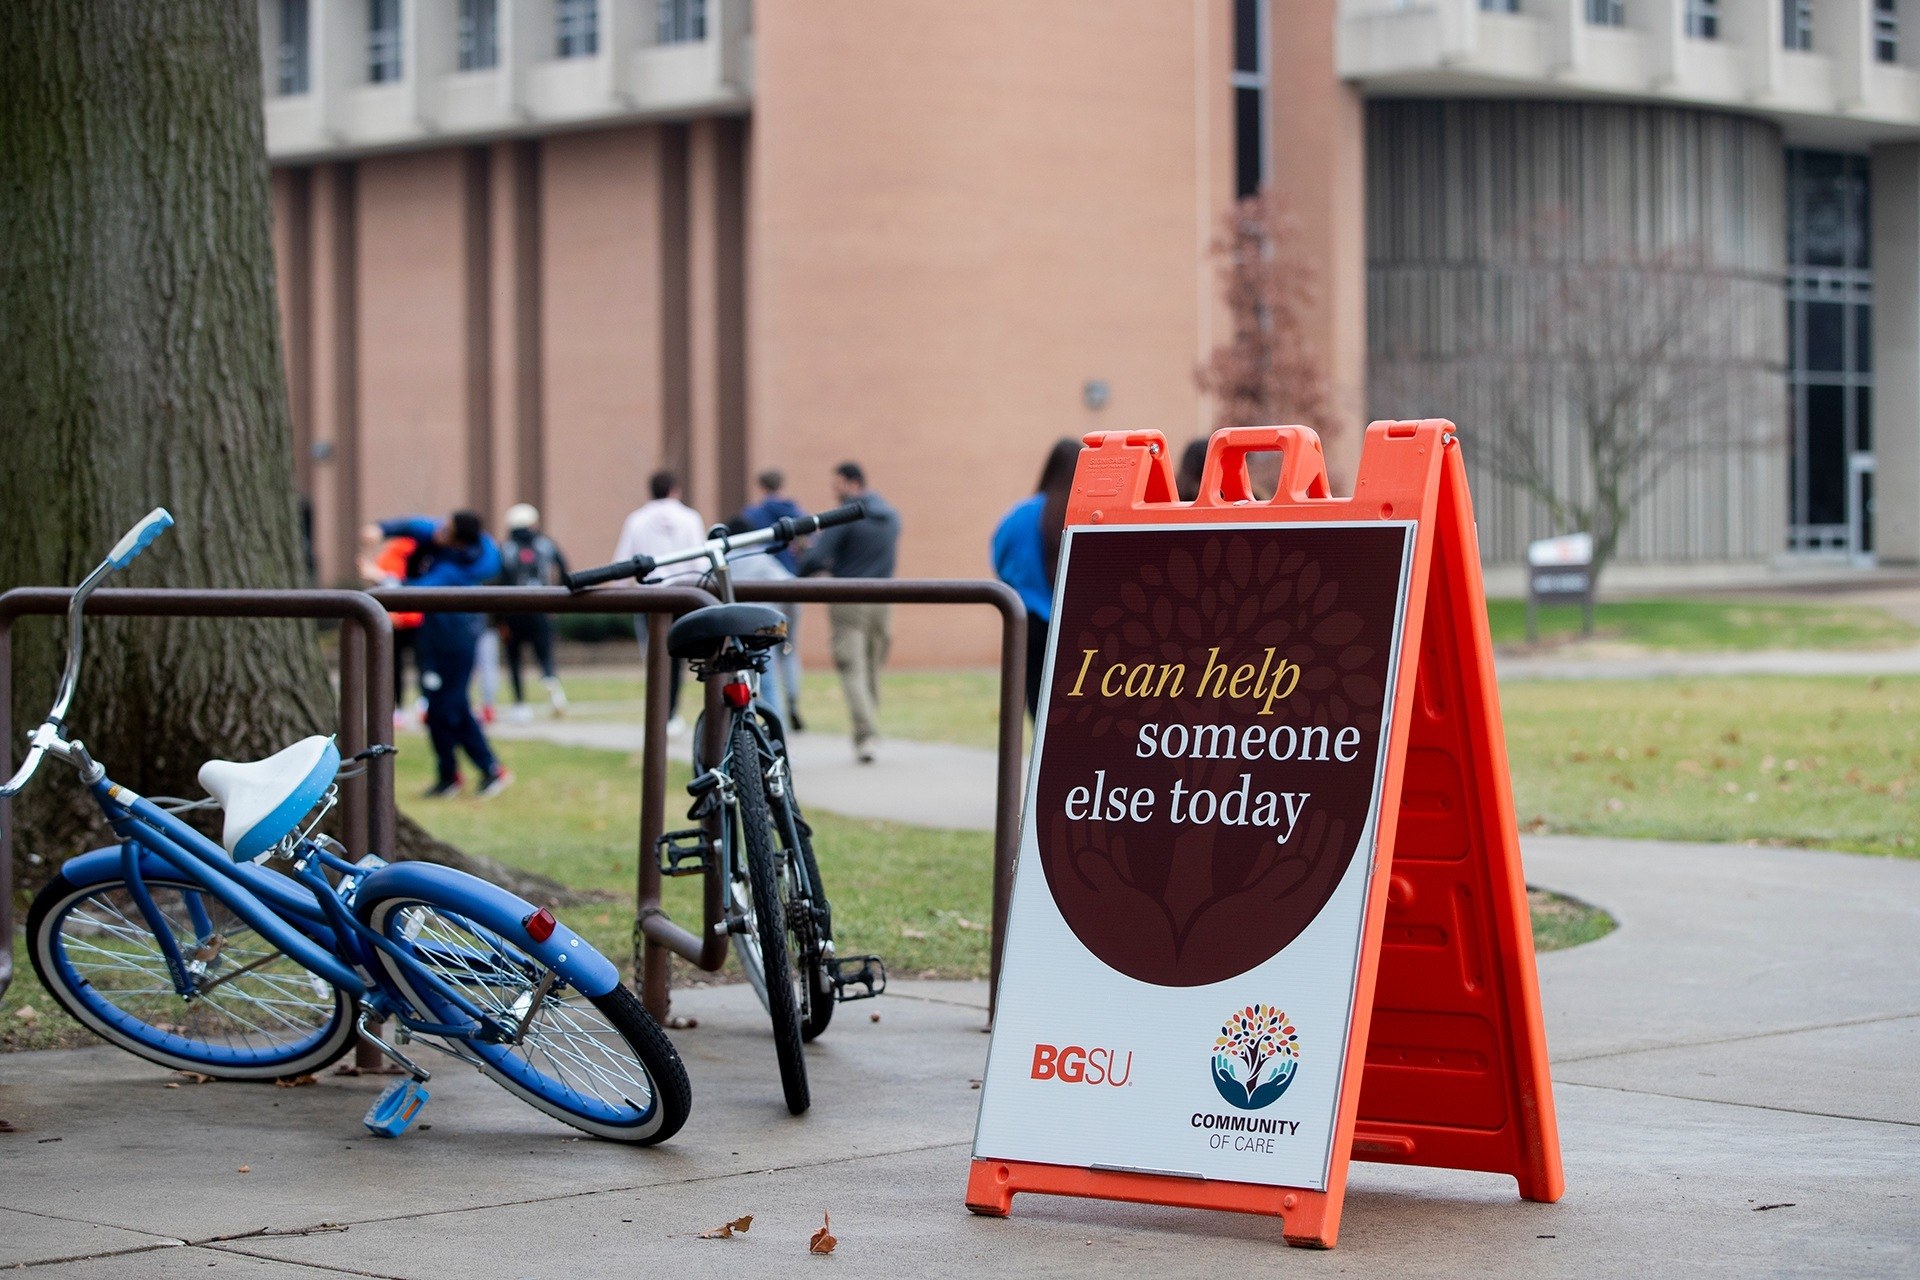 BGSU Community of Care: I can help someone today sign